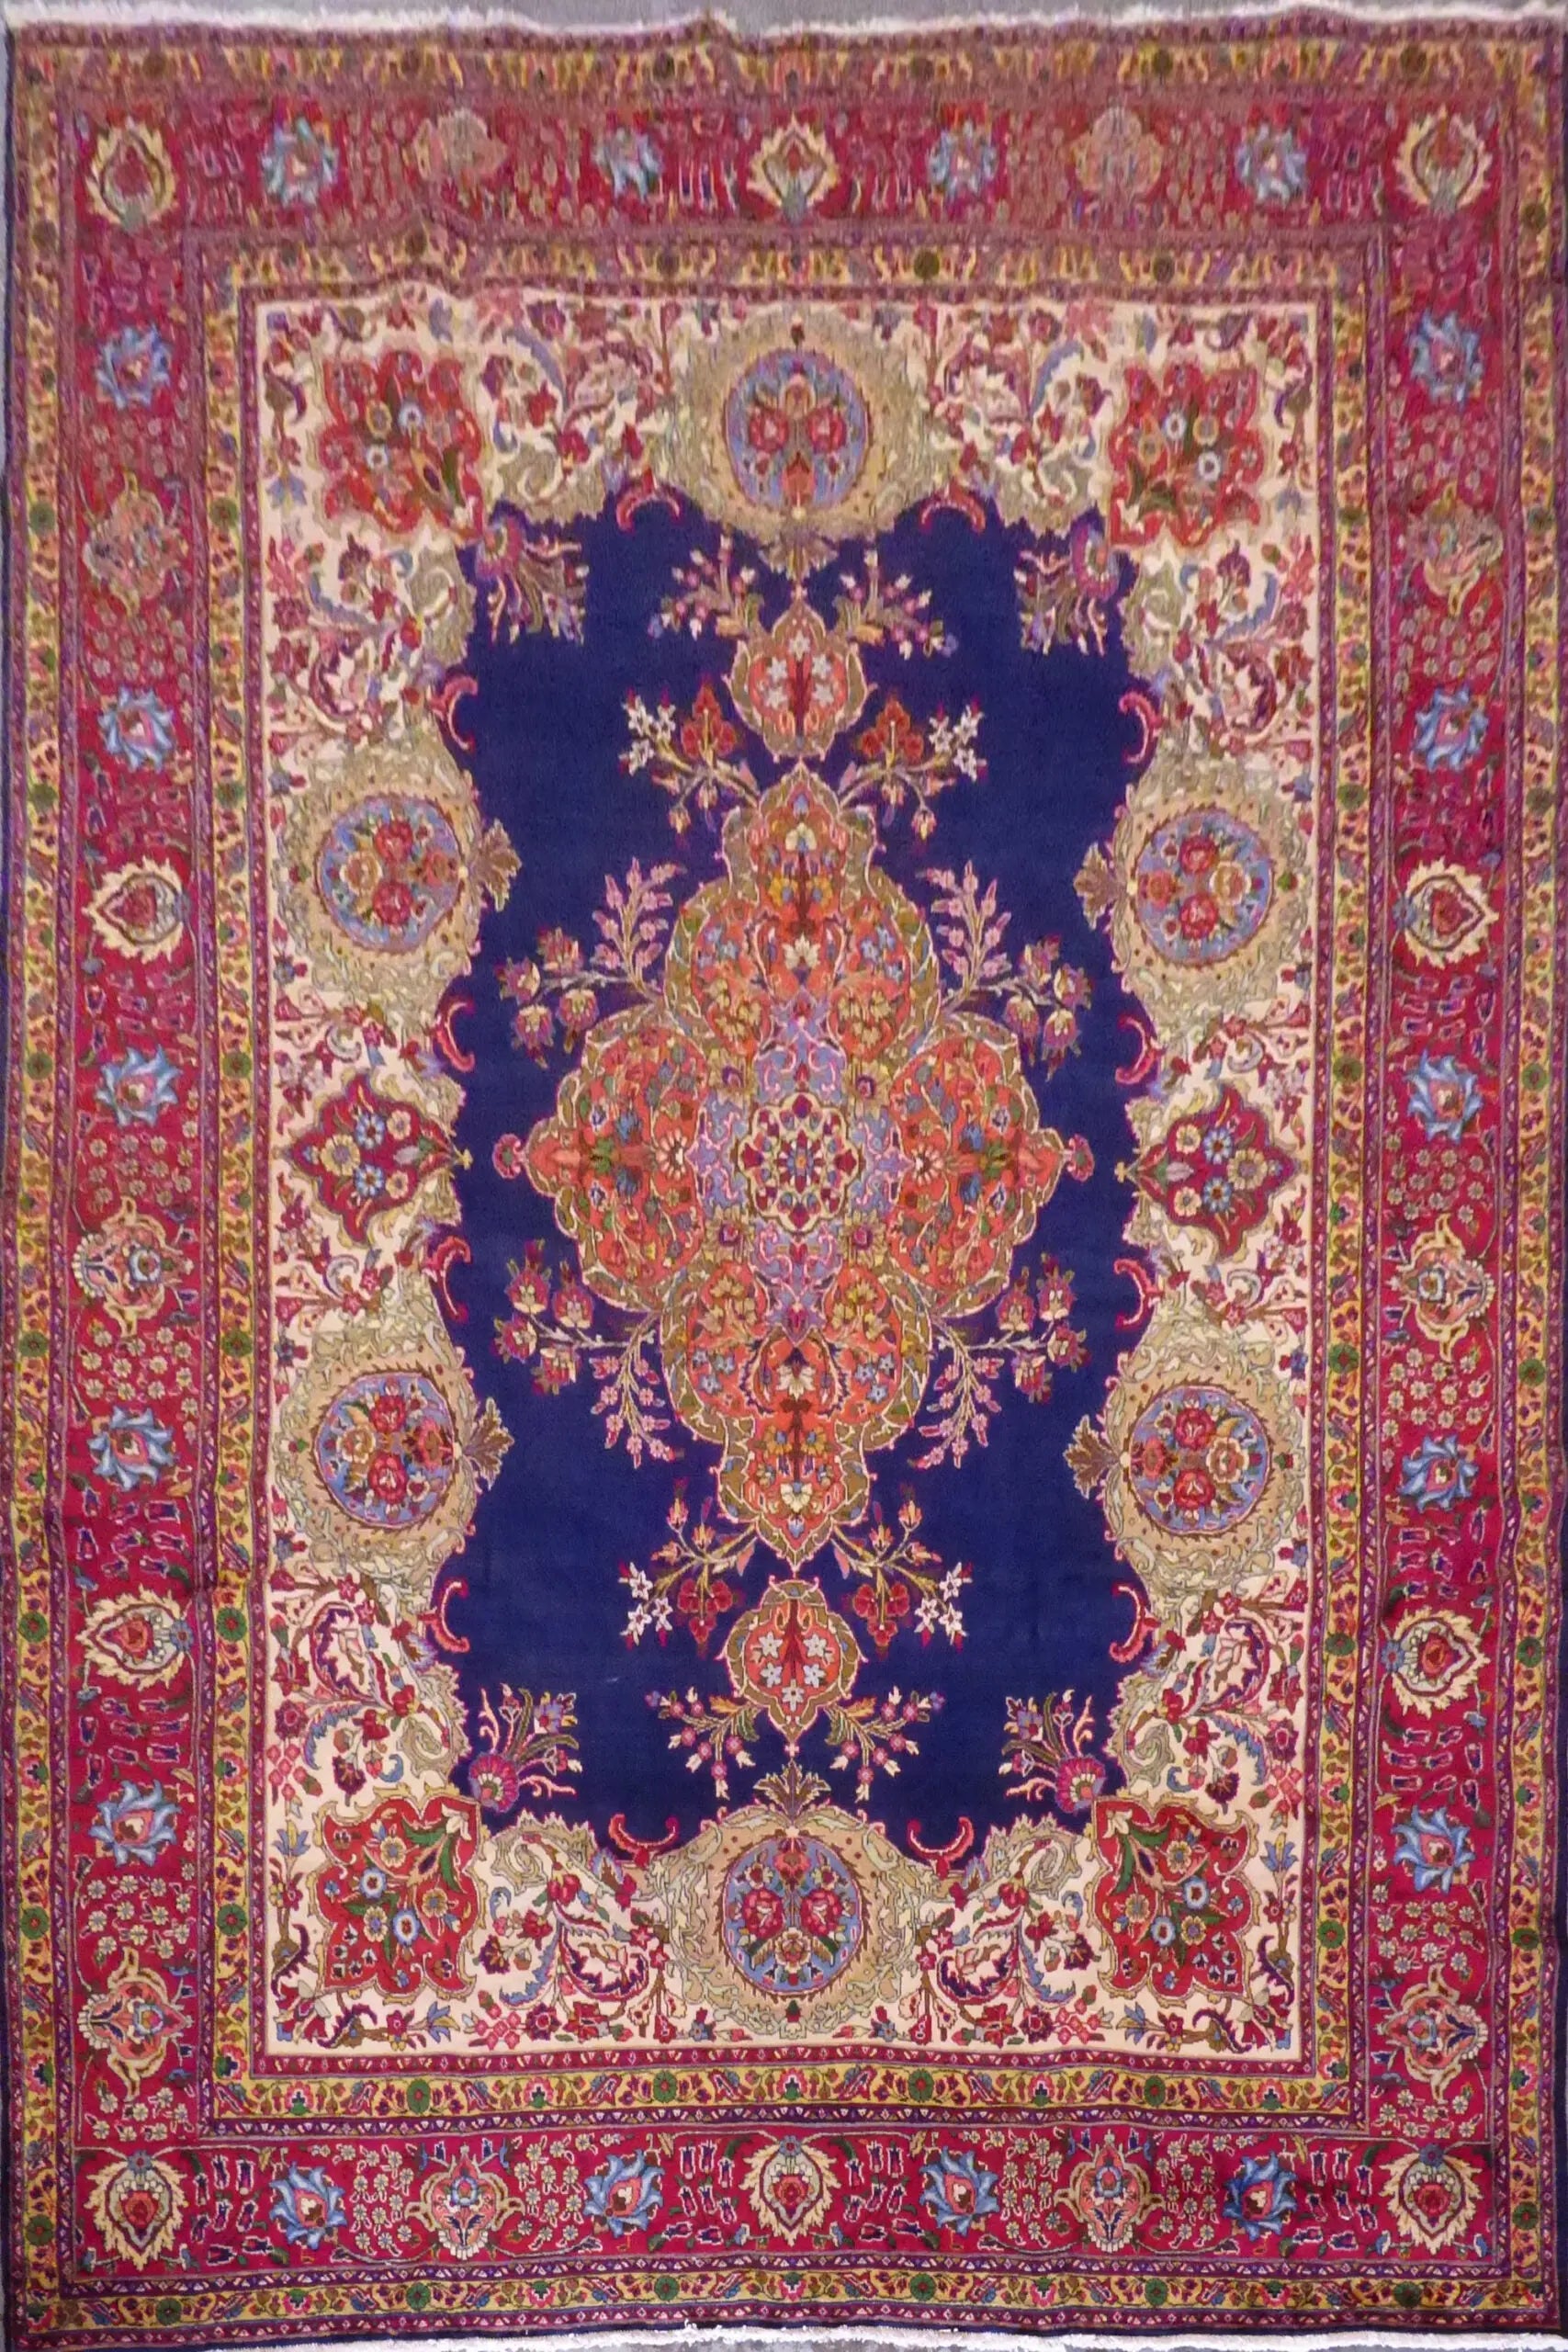 Persian Hand Knotted Persian, Tabriz Rugs, Traditional Floral, Natural Vegetable Dyes, Wool & Cotton, 12'10" X 10', Panr573 (Red : 10629)